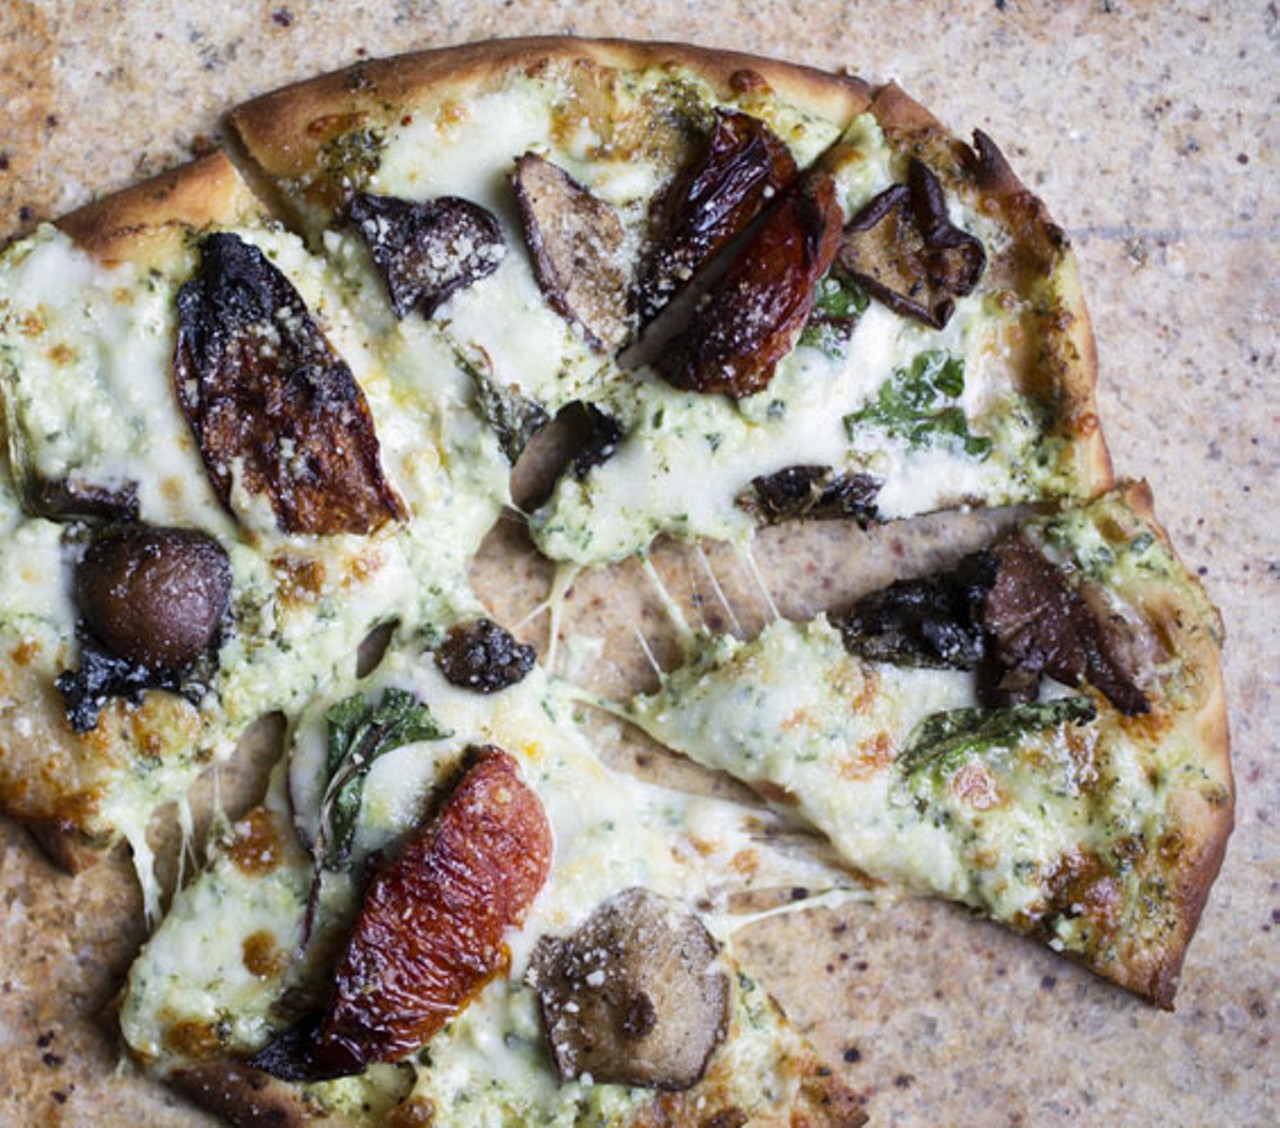 This flatbread pizza is topped with spinach and artichokes and roasted mushrooms.